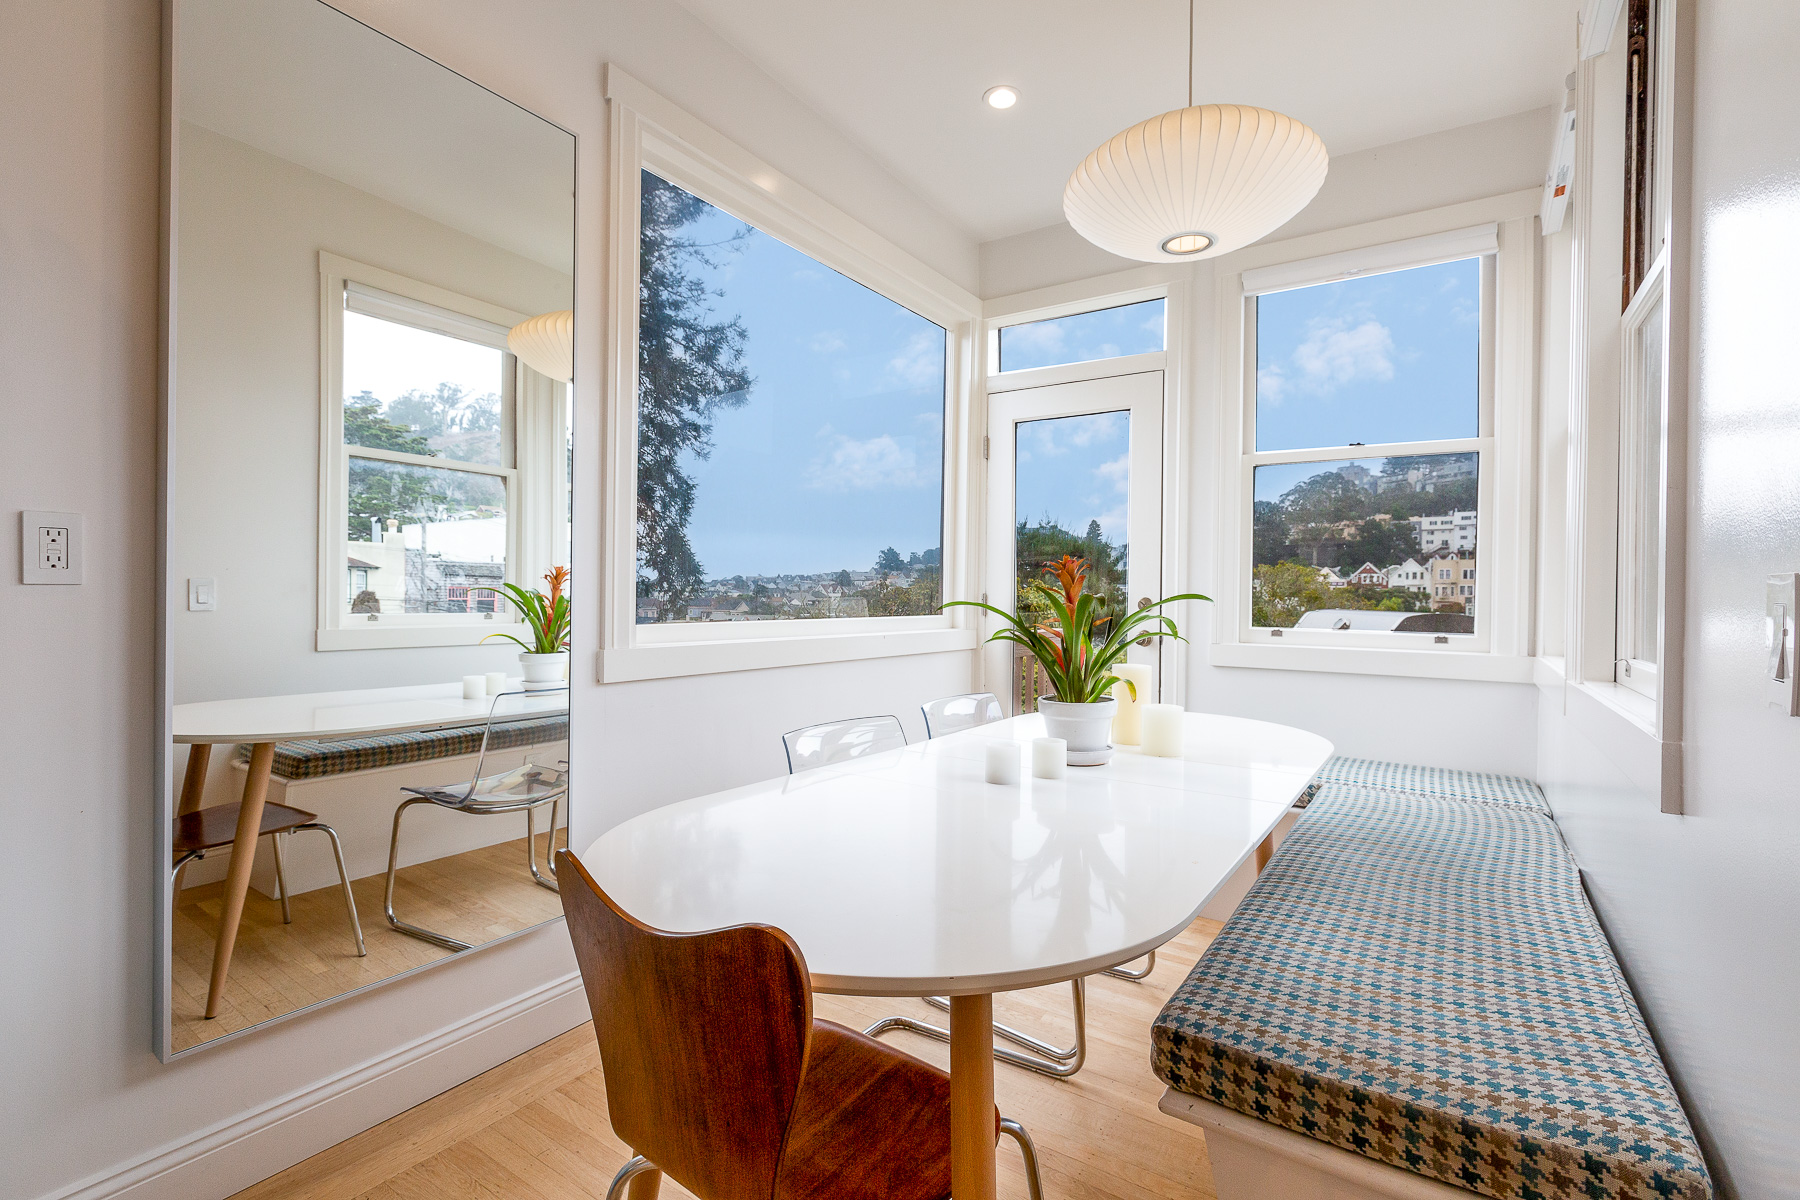 Property Photo: View of the dining area and the spectacular views of the Cole Valley neighborhood and beyond